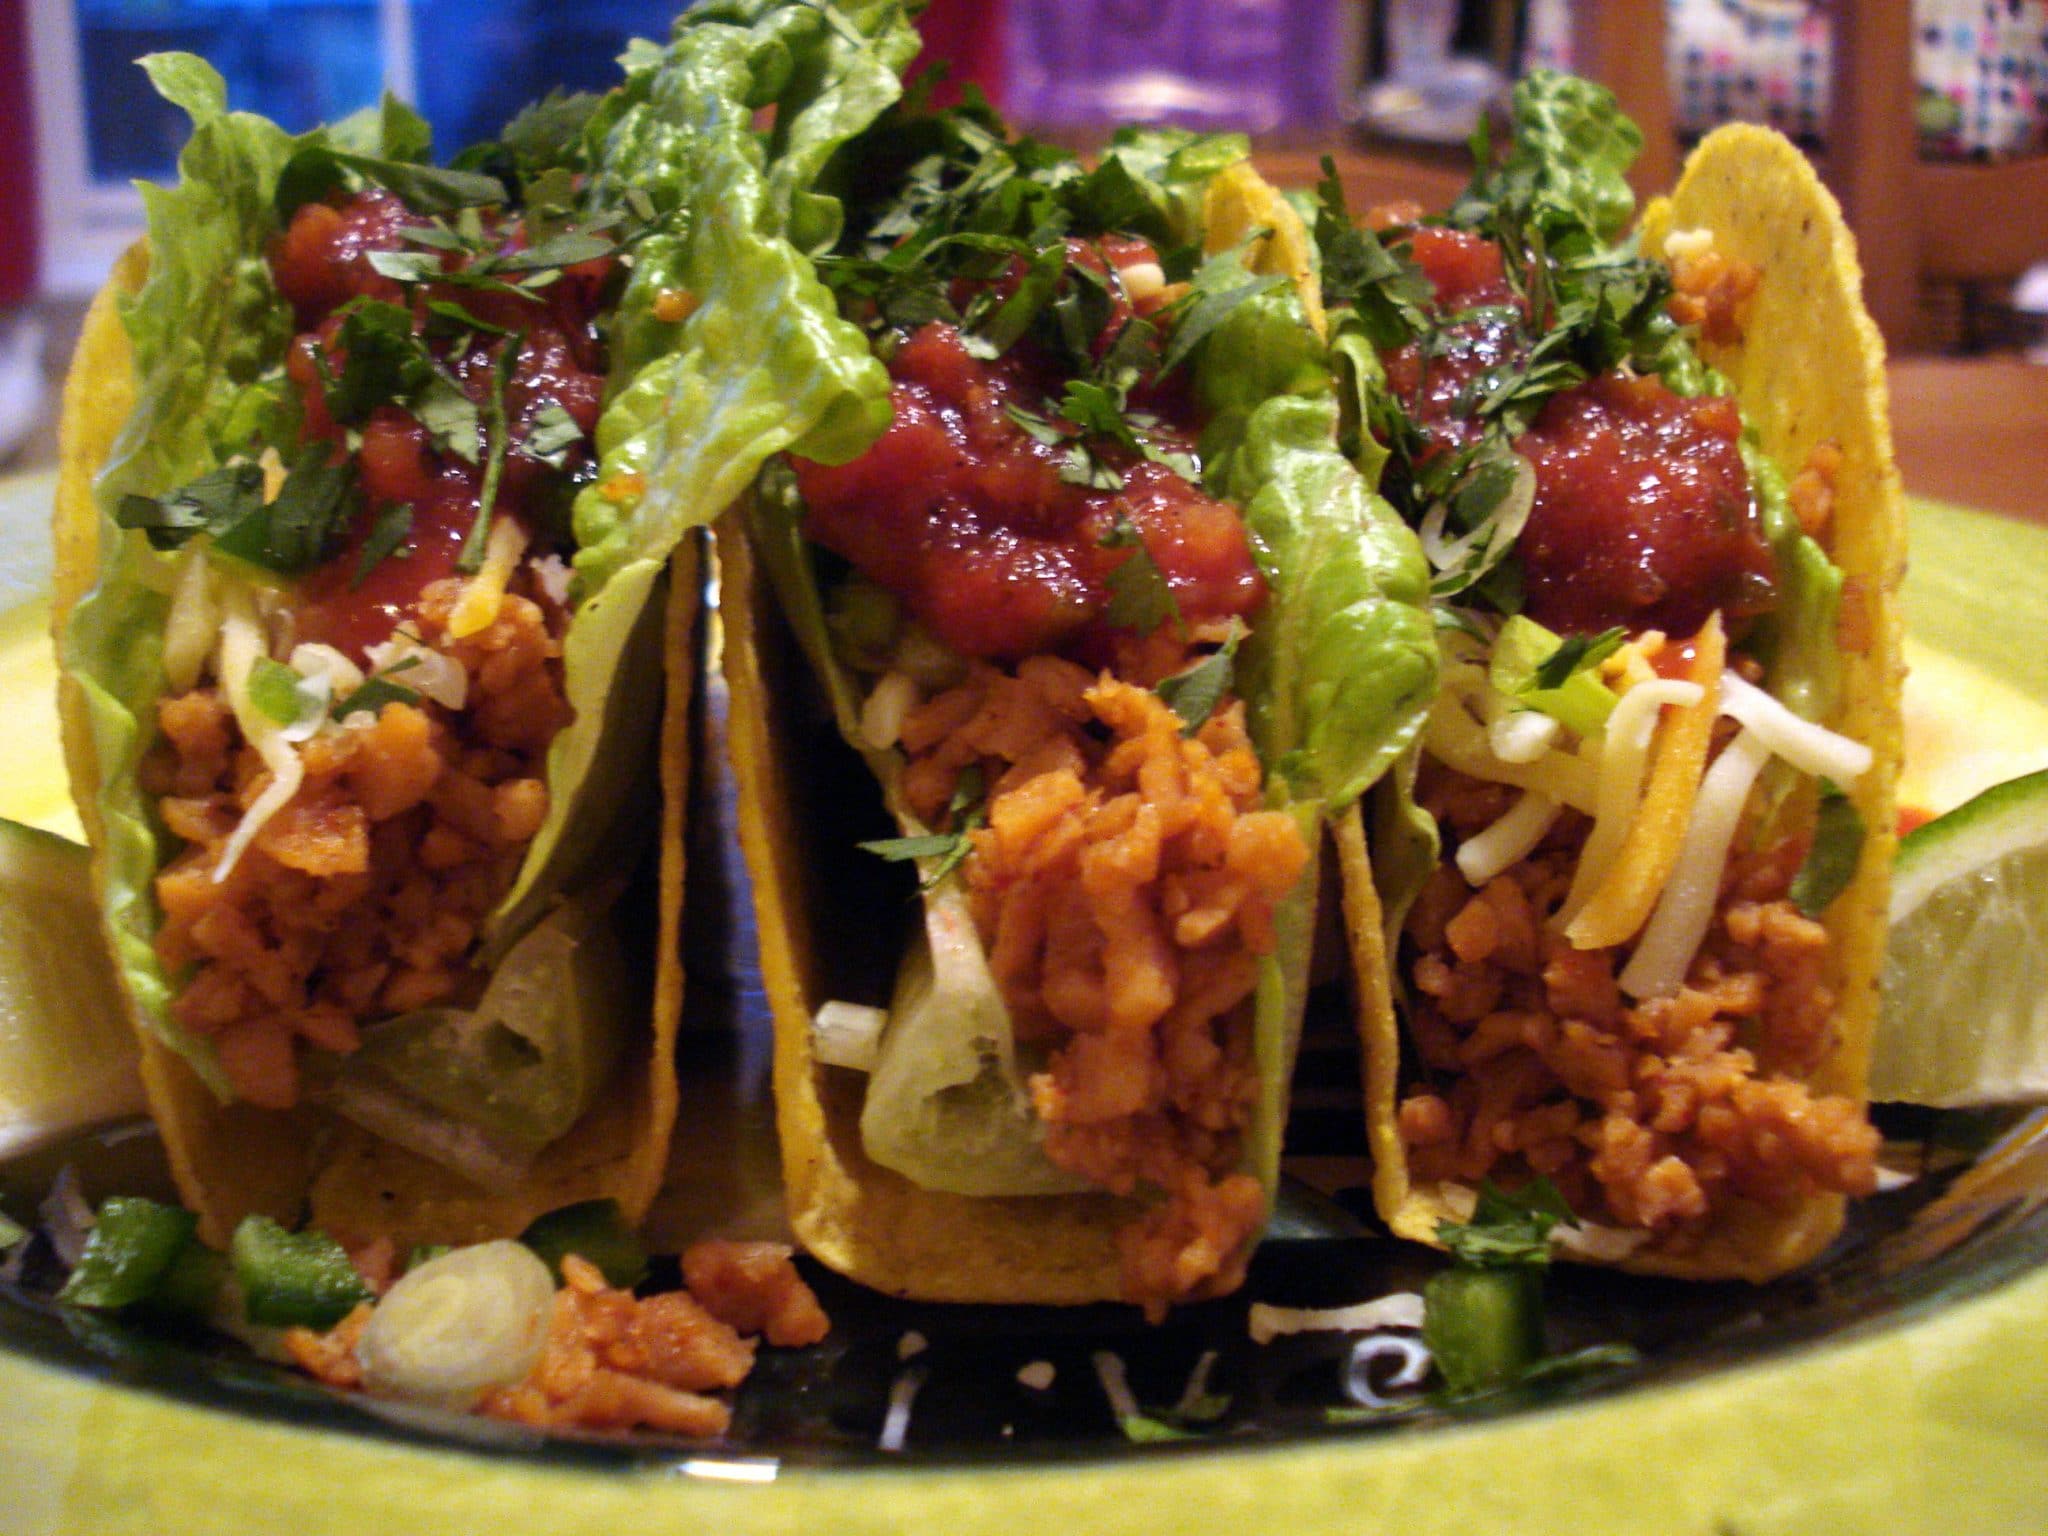 Plate of 3 plant-based tacos